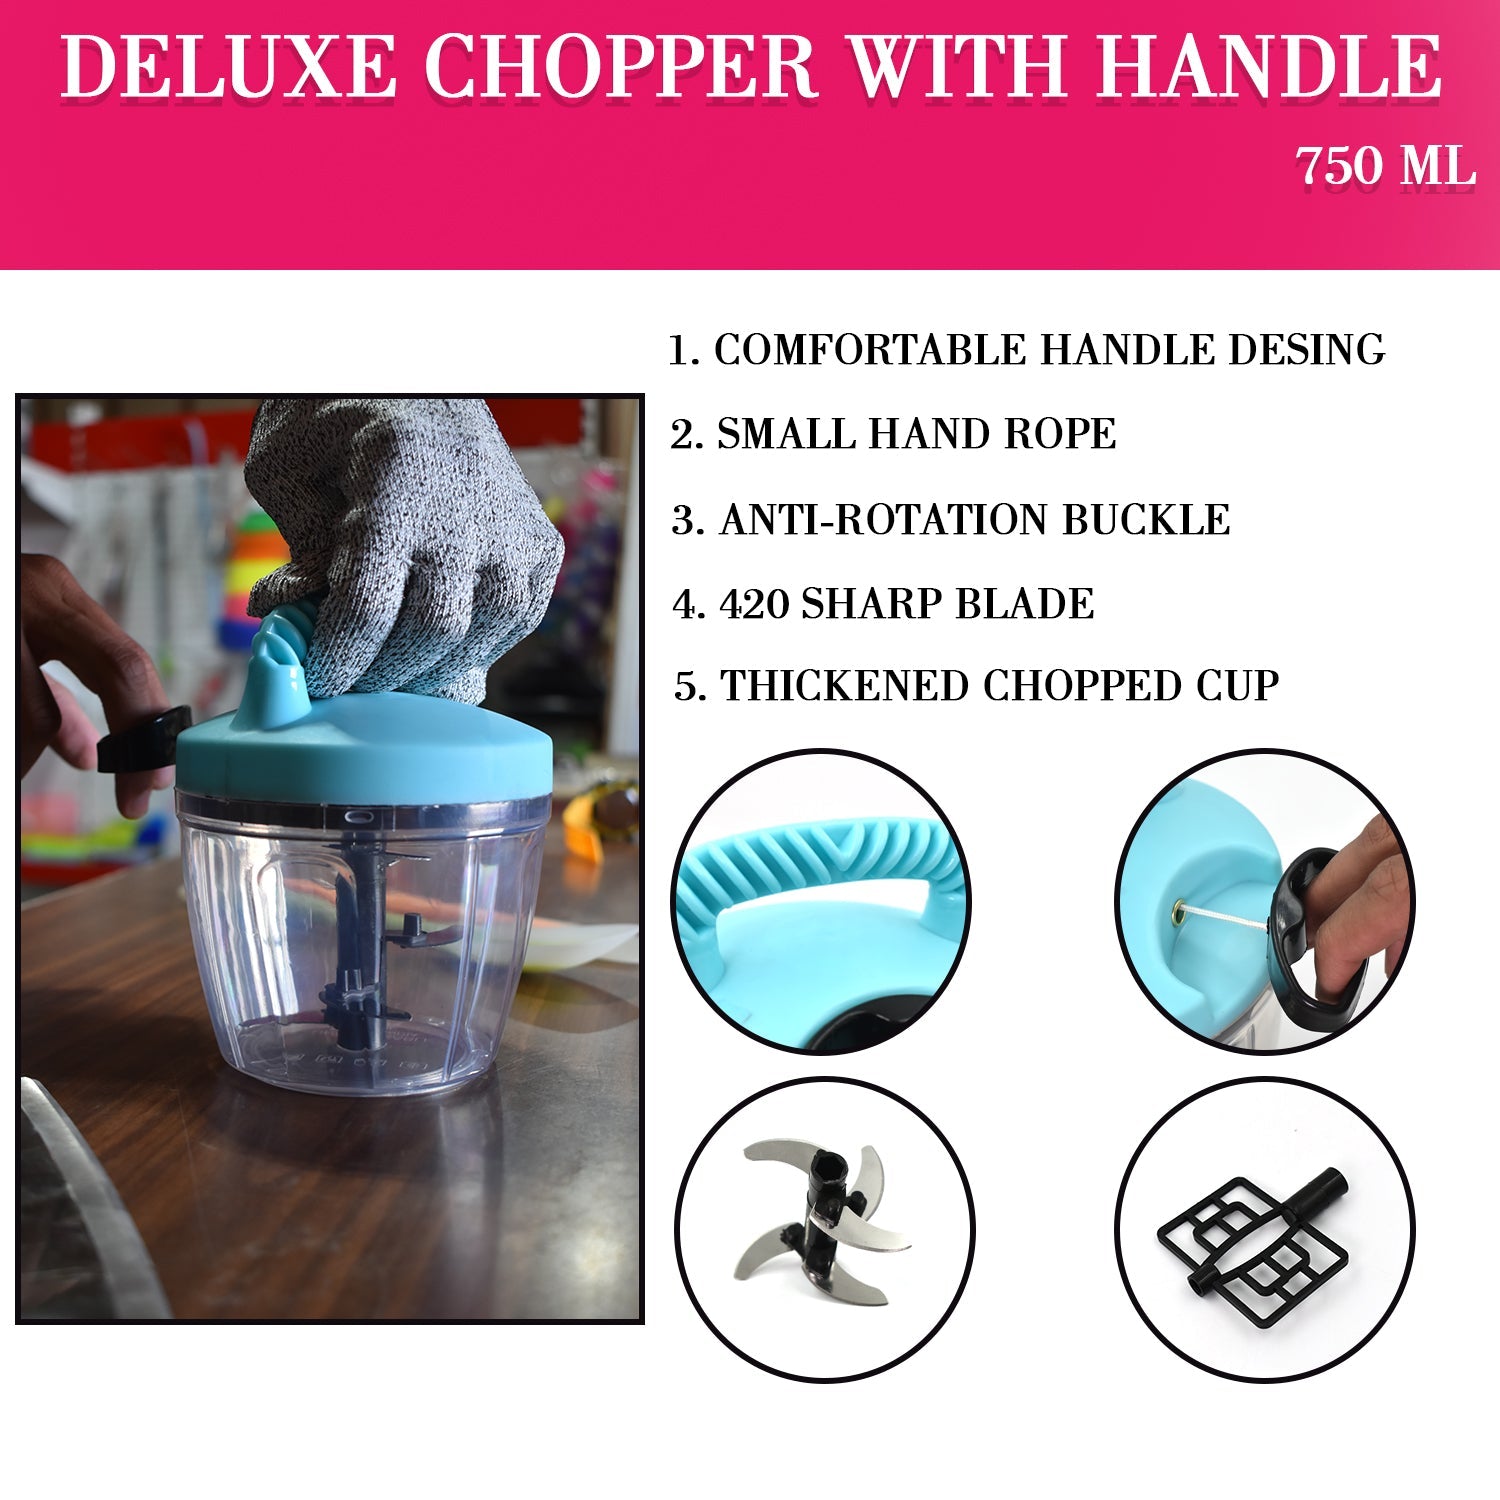 2713 2 in 1 Handy Chopper 750 ML used  for cutting and chopping of types of vegetables and fruits etc.